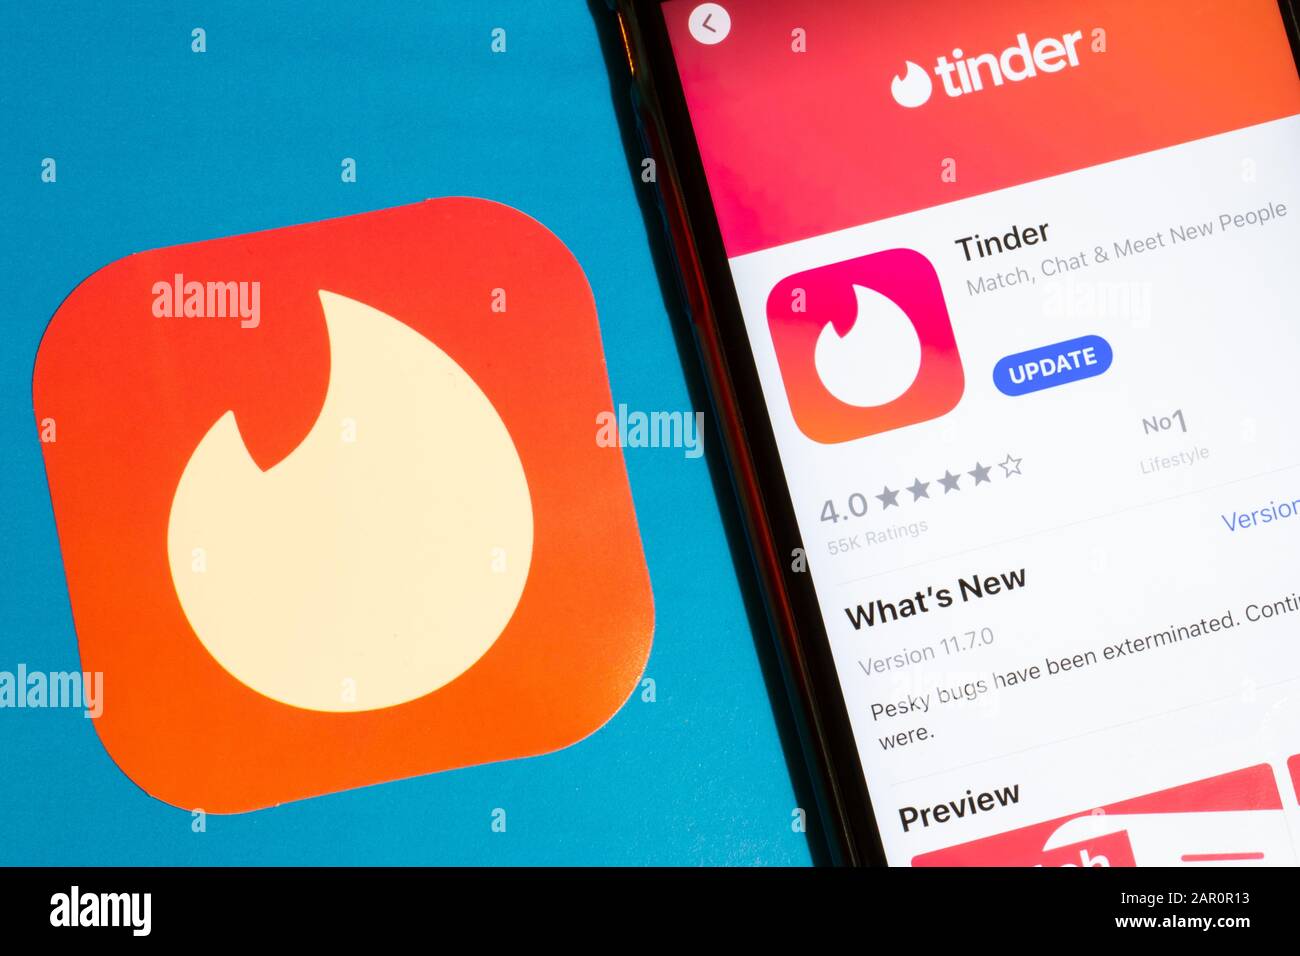 Los Angeles, California, USA - 22 January 2020: Tinder app logo and phone with icon close up on blue background, Illustrative Editorial Stock Photo